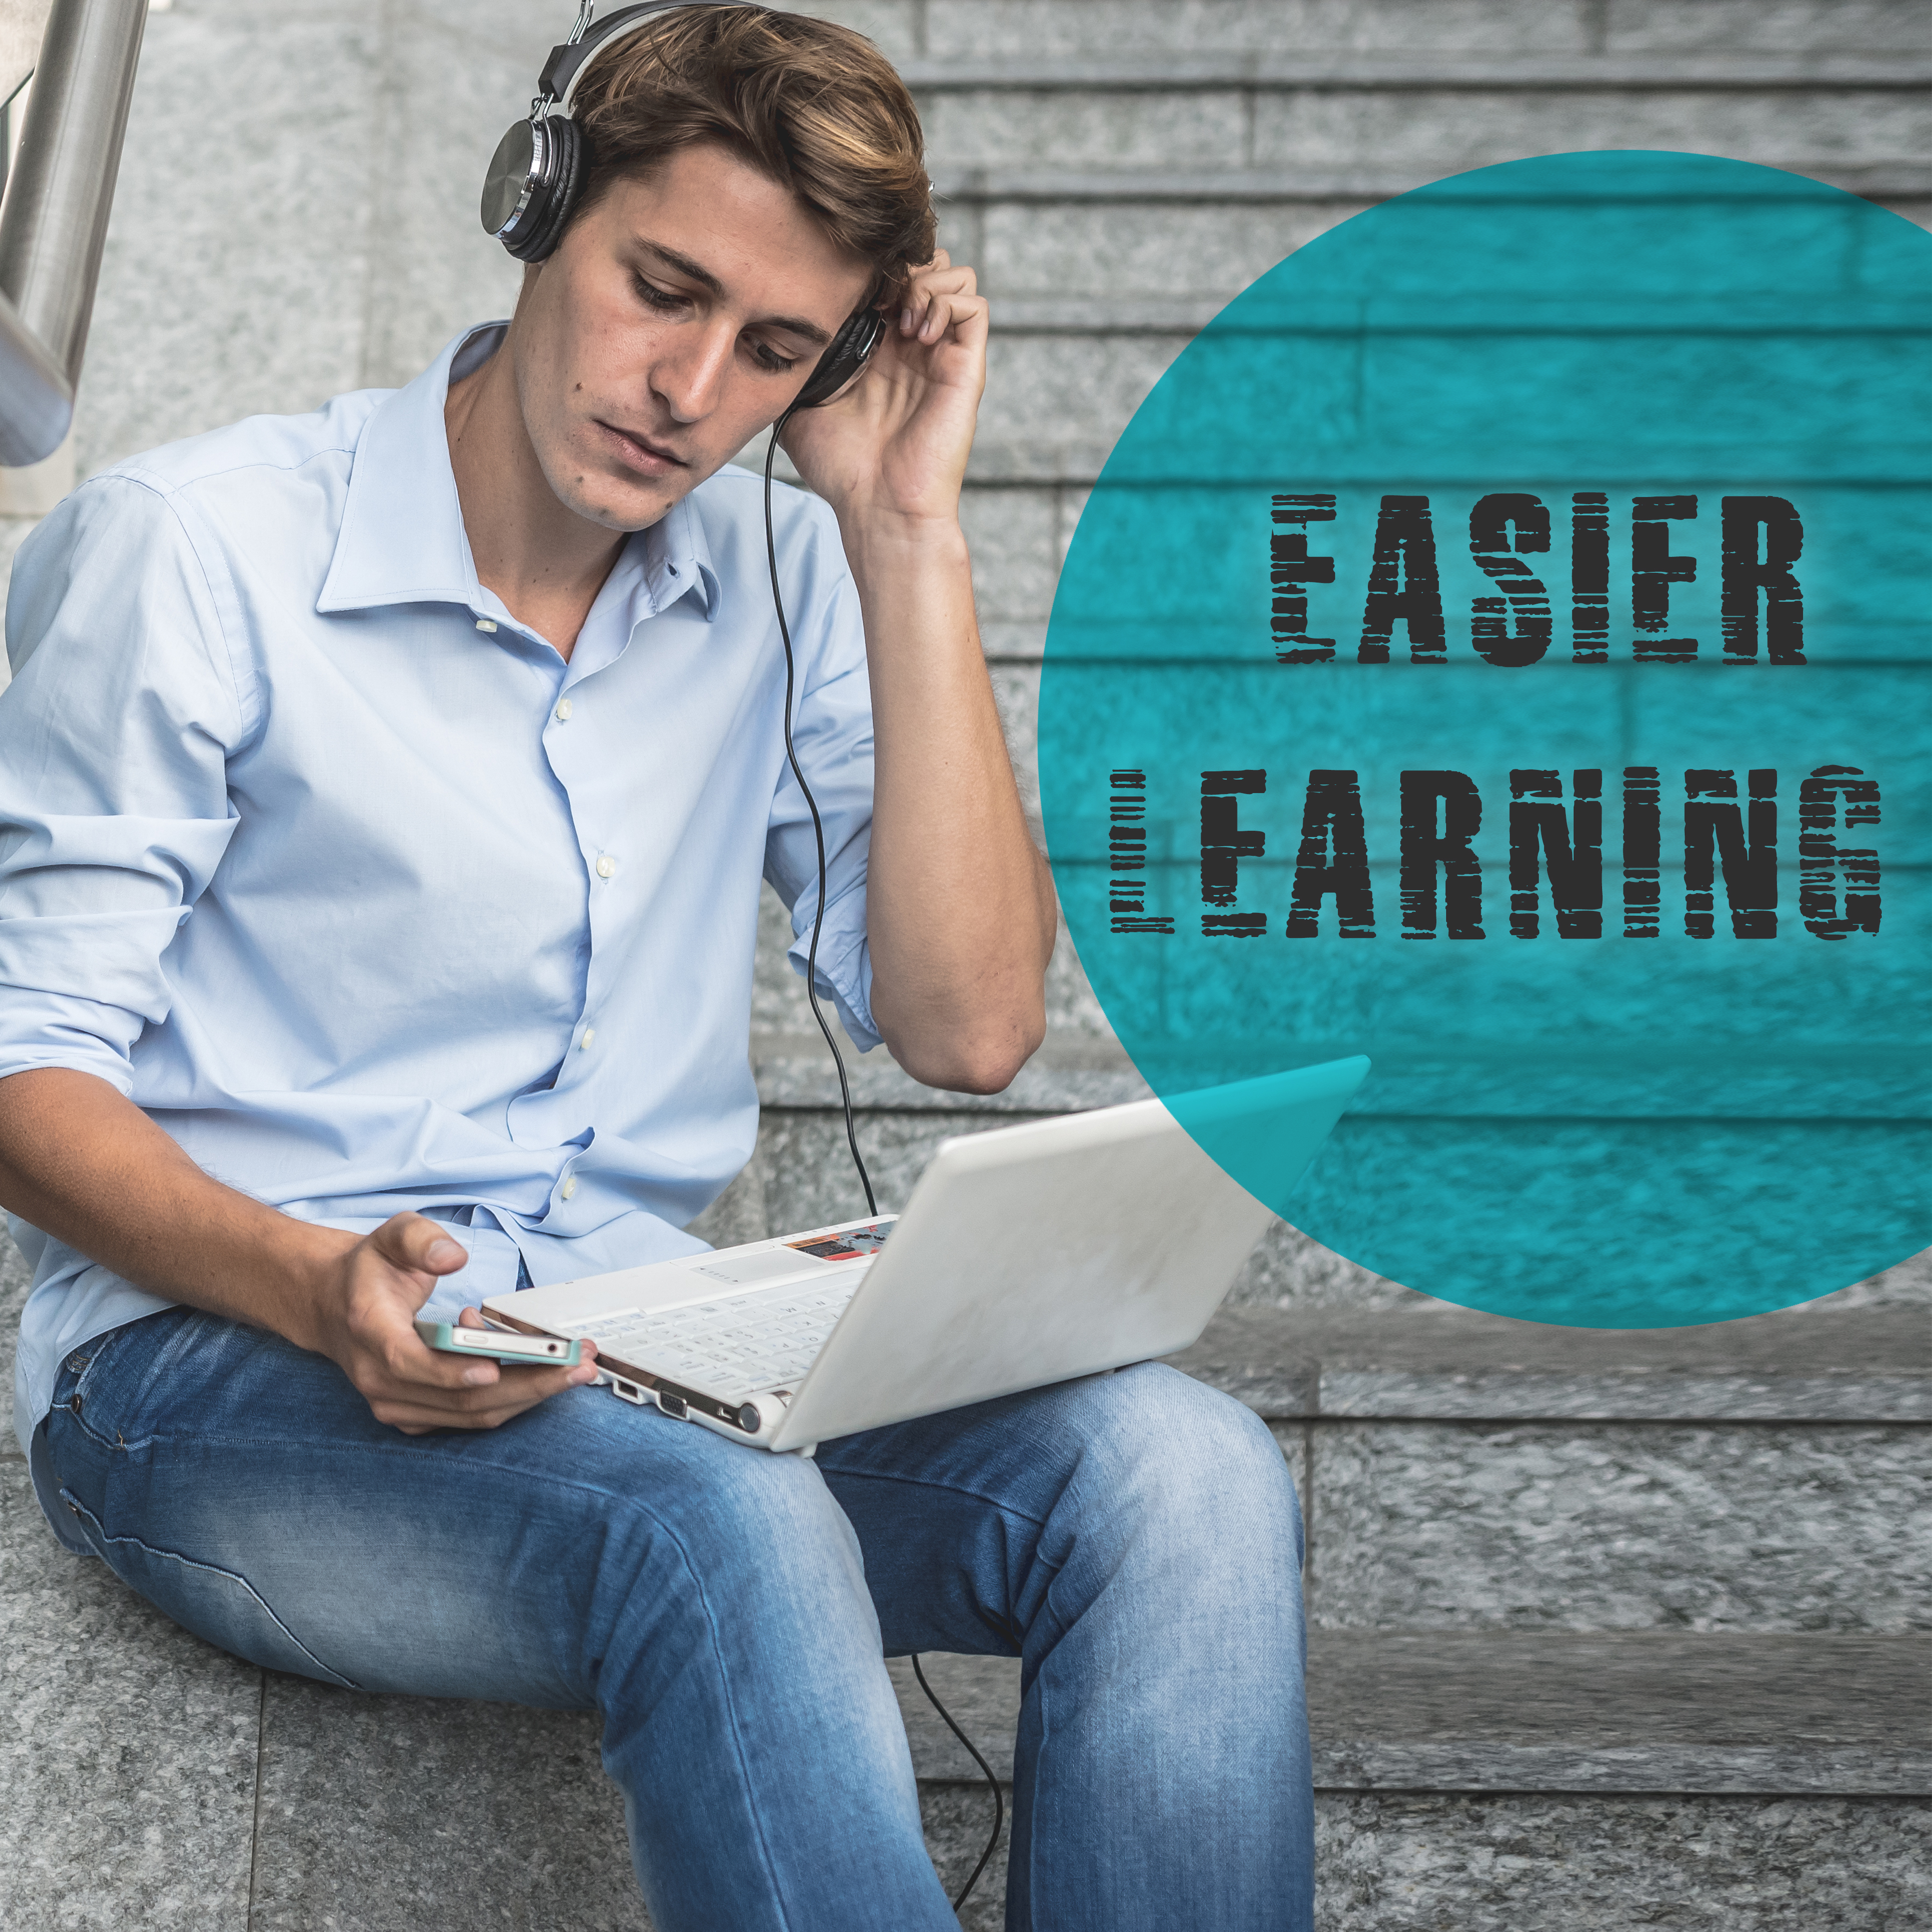 Easier Learning – Studying Music, Brain Power, Deep Focus, Best Classical Music for Study, Bach, Mozart